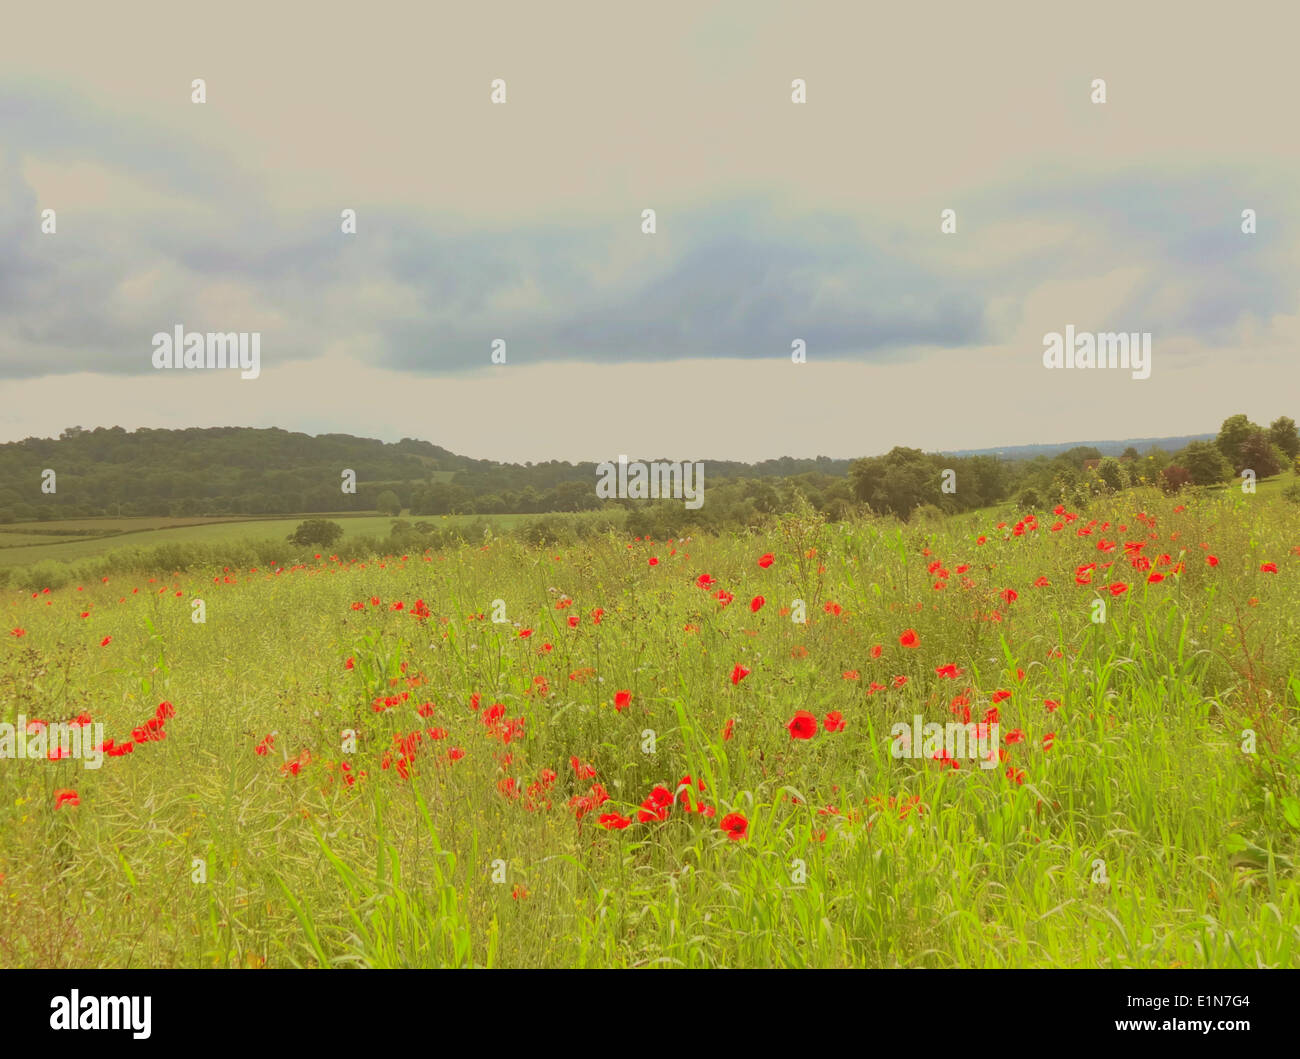 Kent, UK.7 June 2014.We will remember them. Poppy field near Shoreham. A warm day with scattered storms.David Burr/Alamy Live News Stock Photo